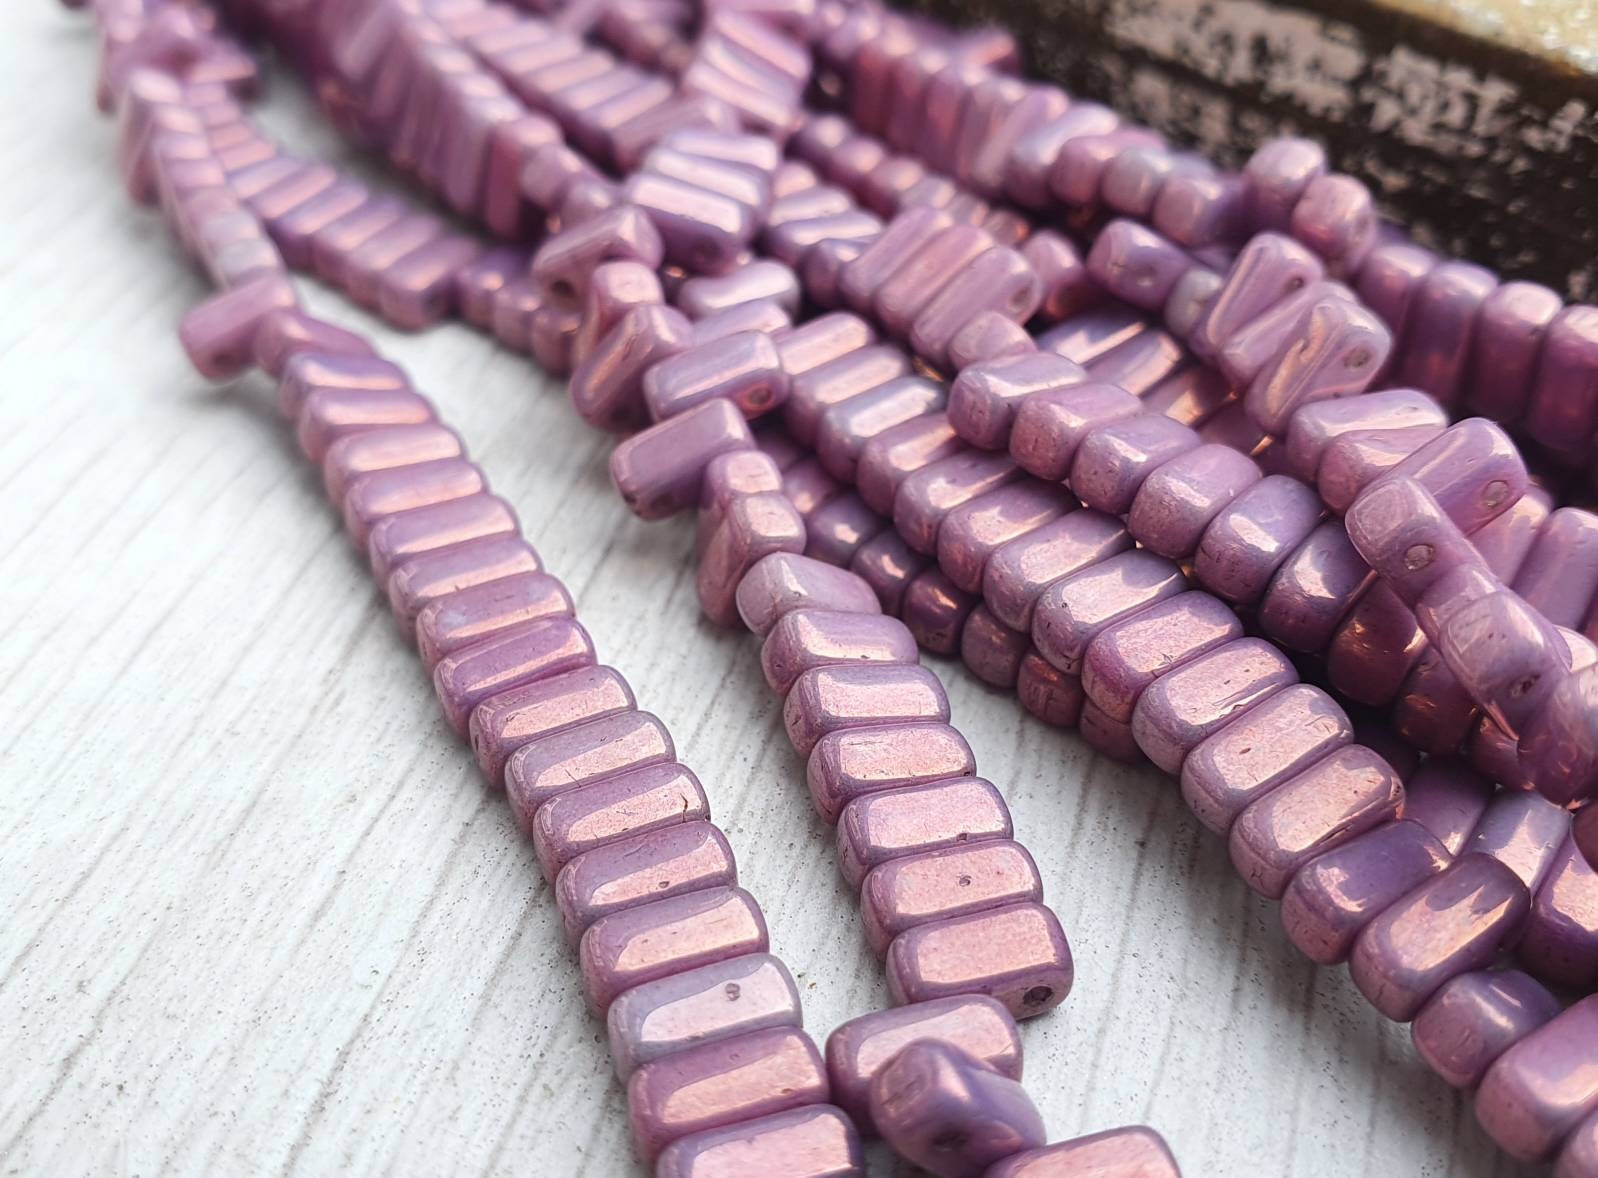 3 X 6mm Lilac Luster 2 Hole Brick Beads Full Strand of 50 - Etsy